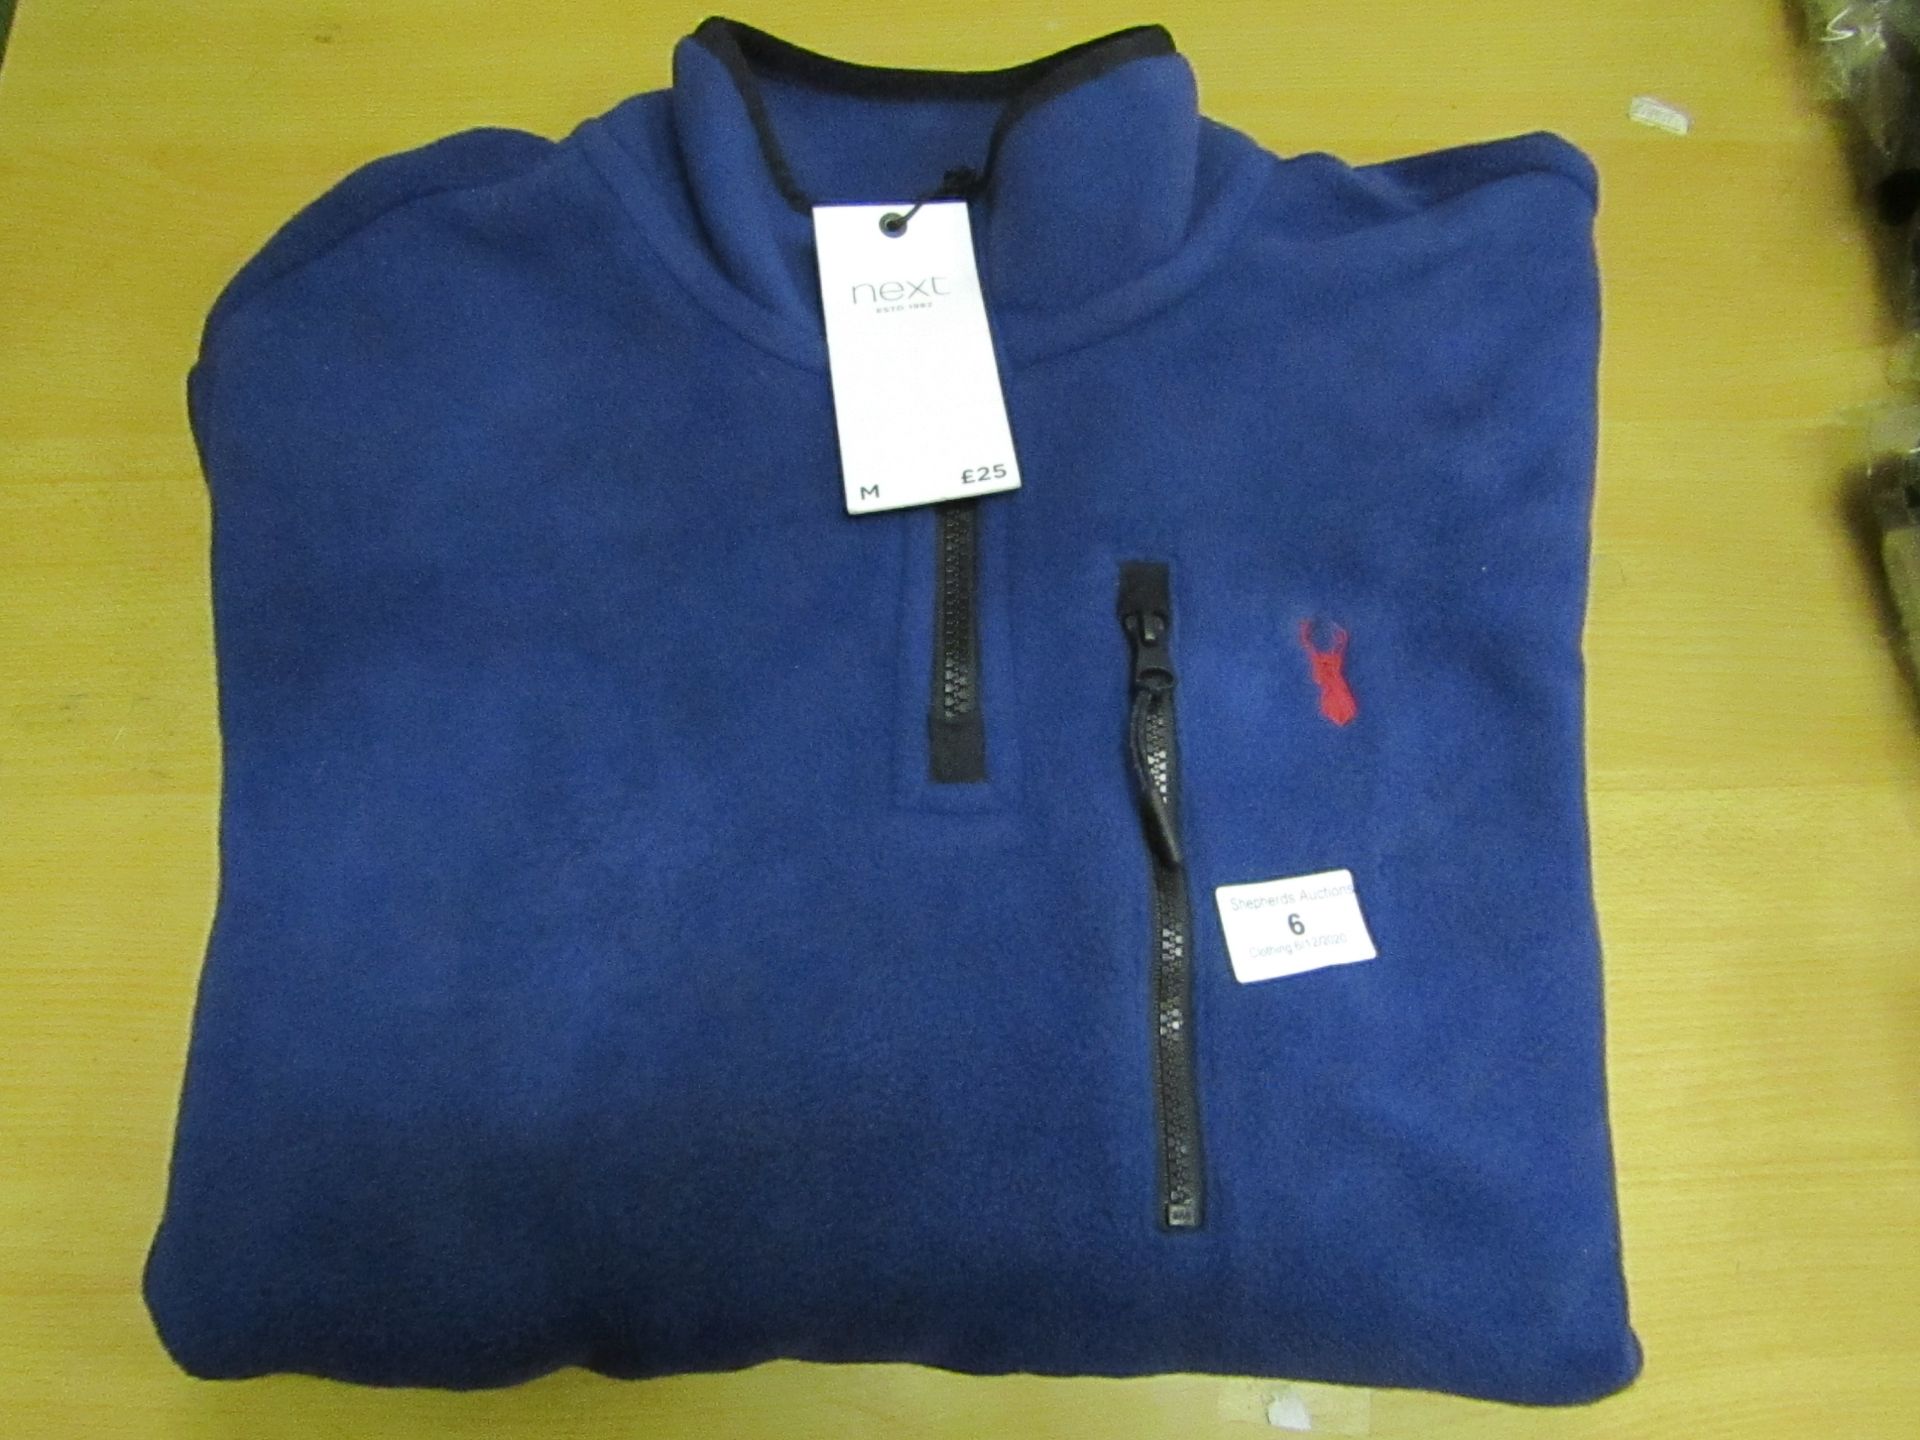 Next Fleece Royal Blue size Med with tags